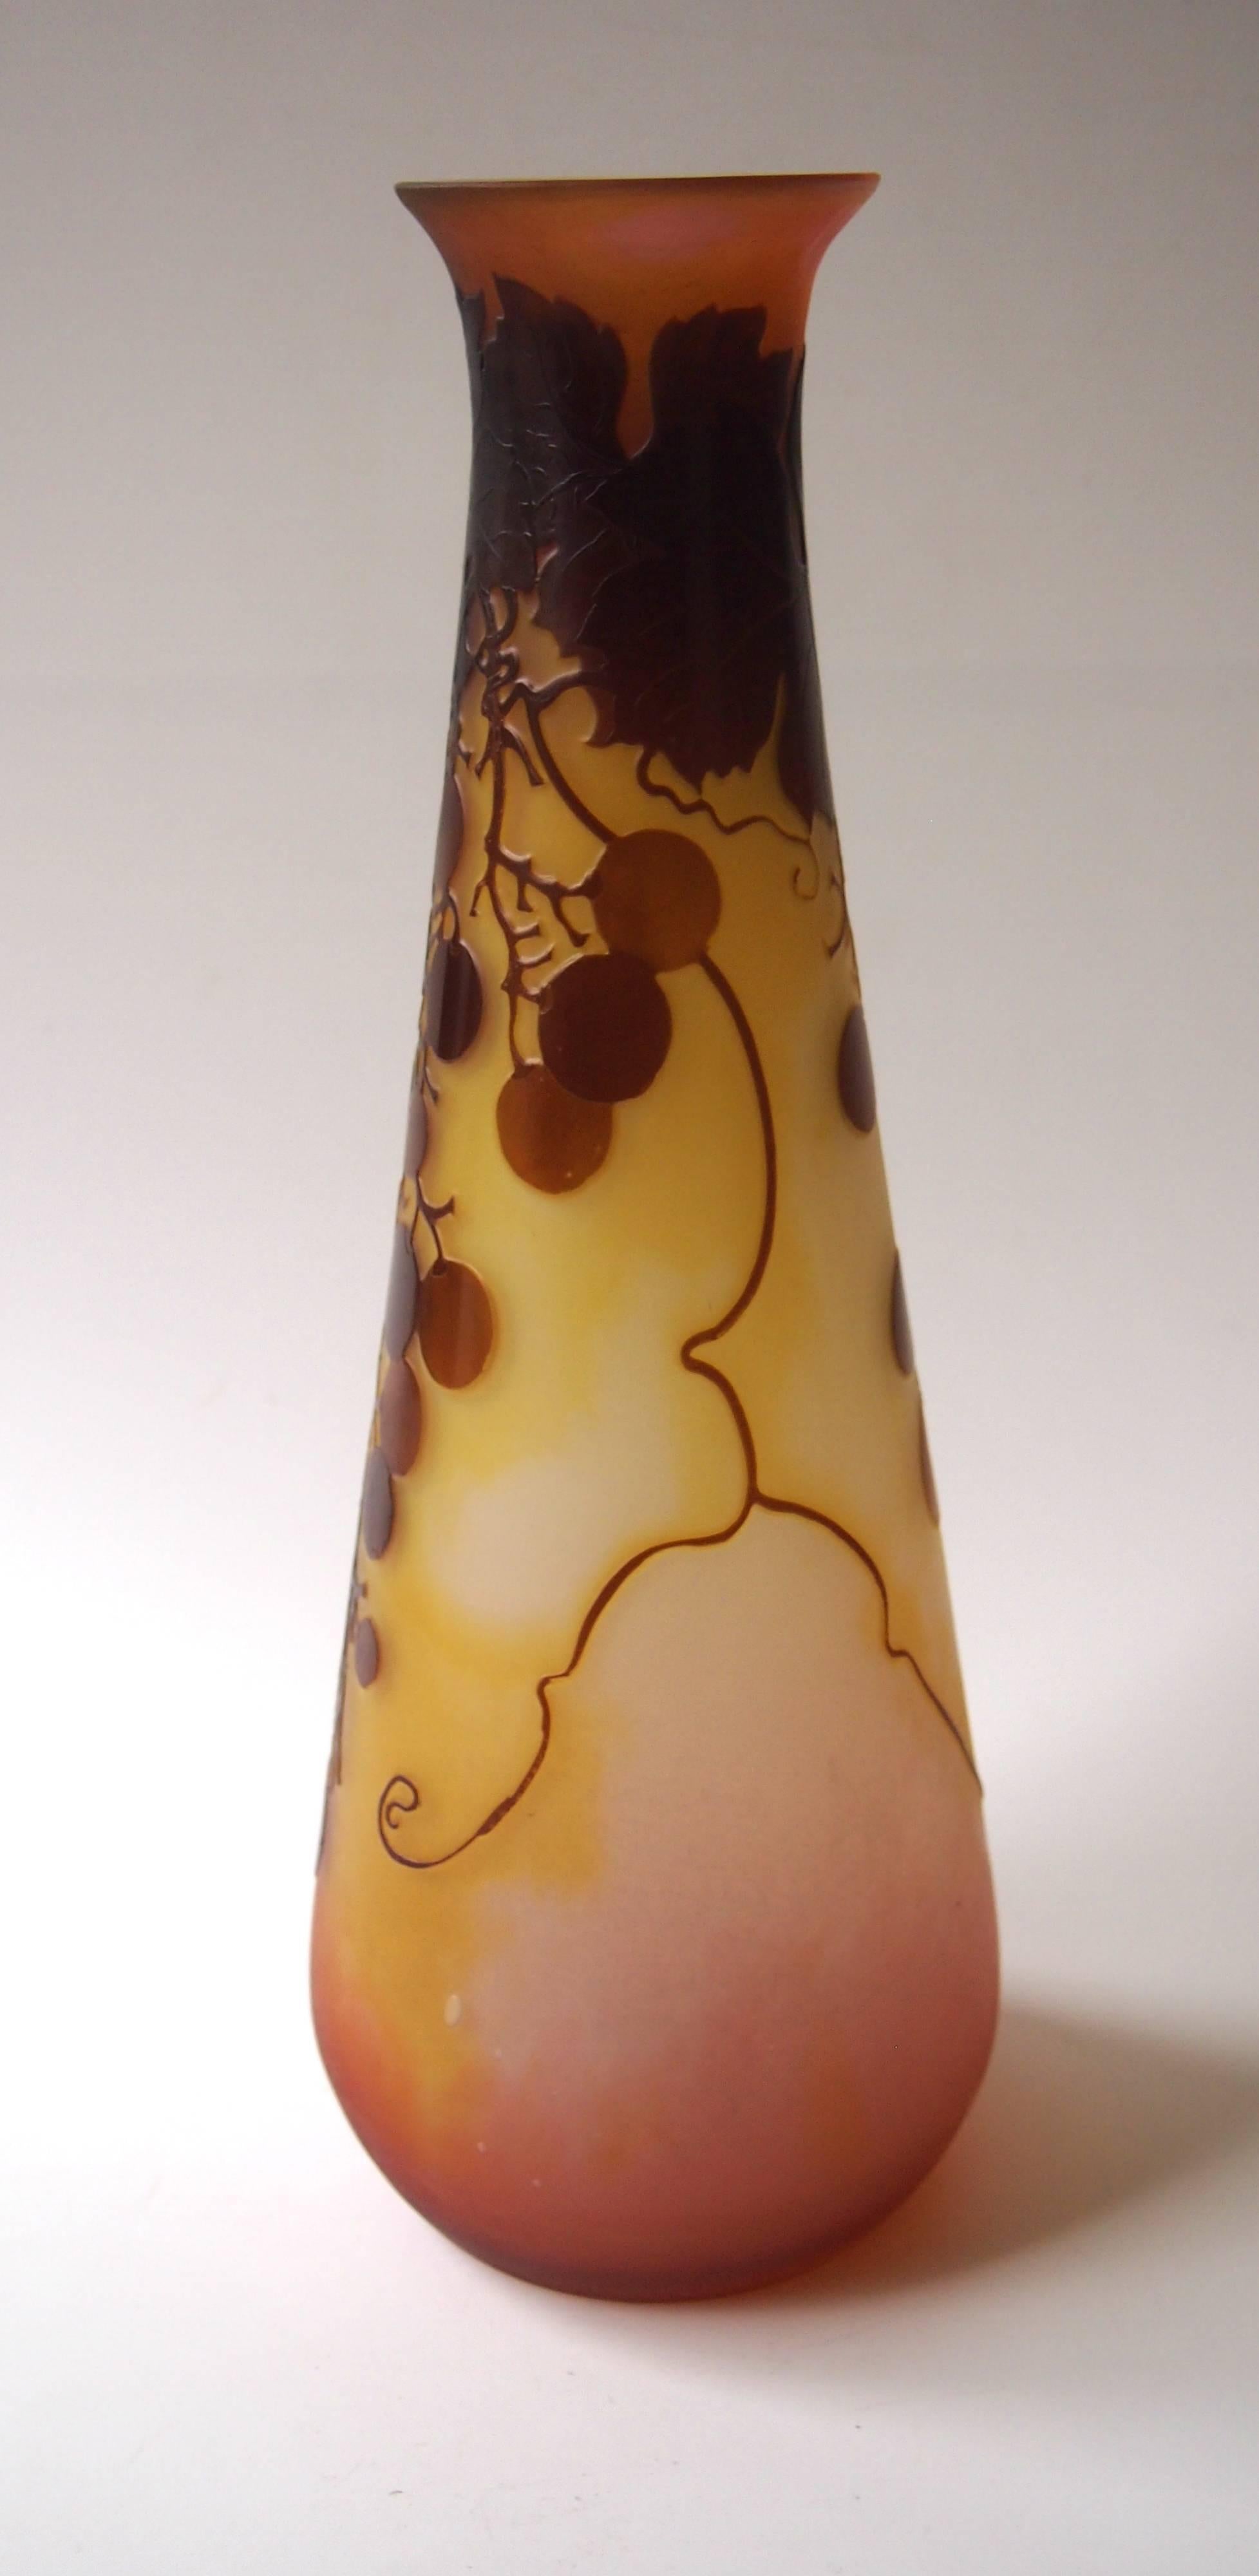 Art Nouveau Emile Galle cameo vase in vibrant brown, pinks and yellows, depicting grapes on branches with leaves and sinuous tendrils, signed in cameo with a '*' used only 1904-1908. A truly classic French design.

Emile Galle was probably the